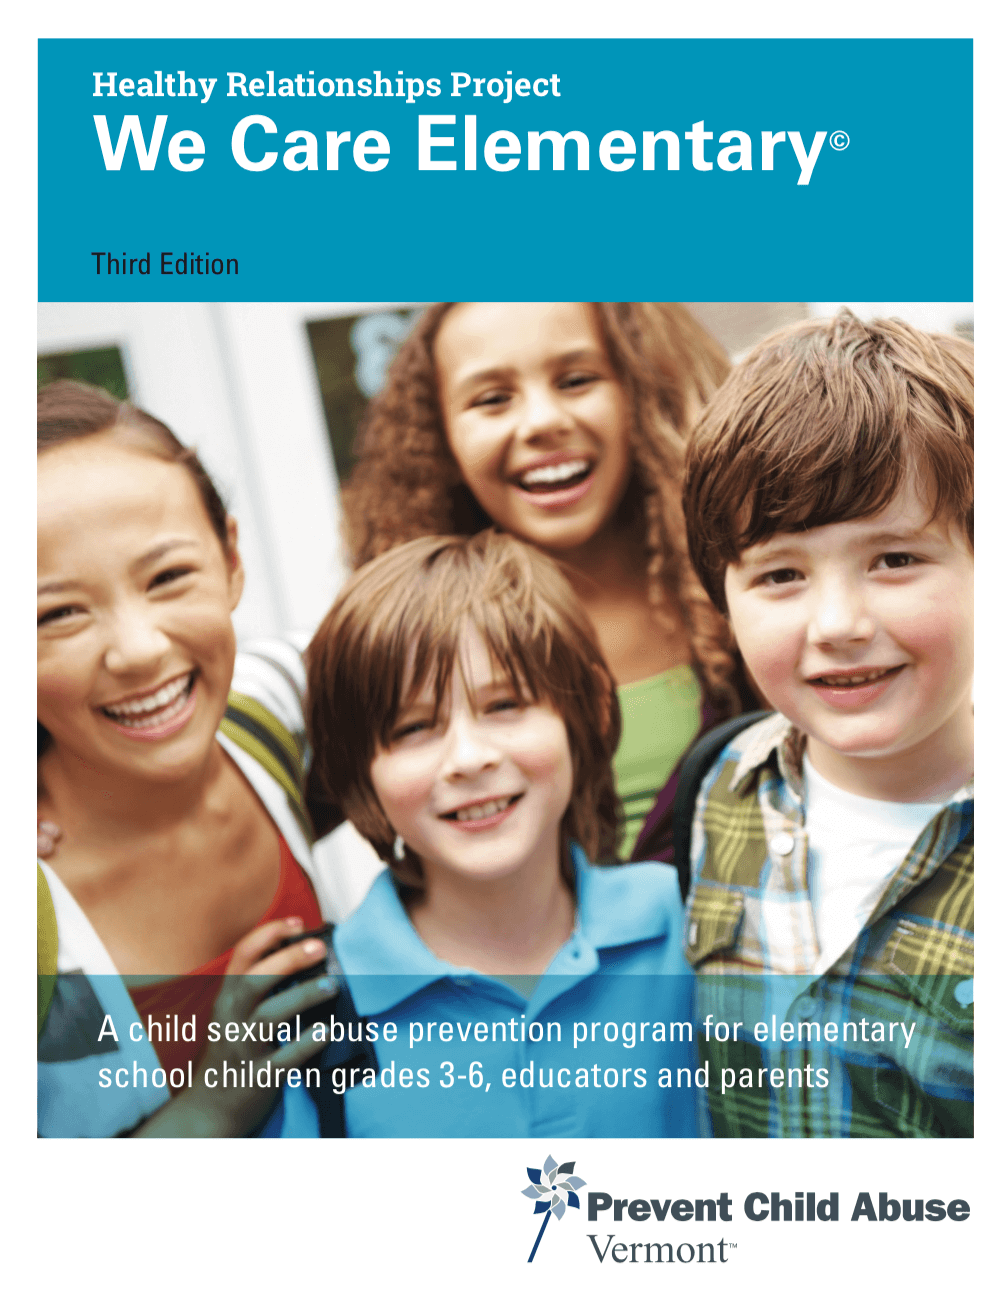 Prevent Child Abuse Vermont's Care for Kids curriculum cover design by Interrobang.